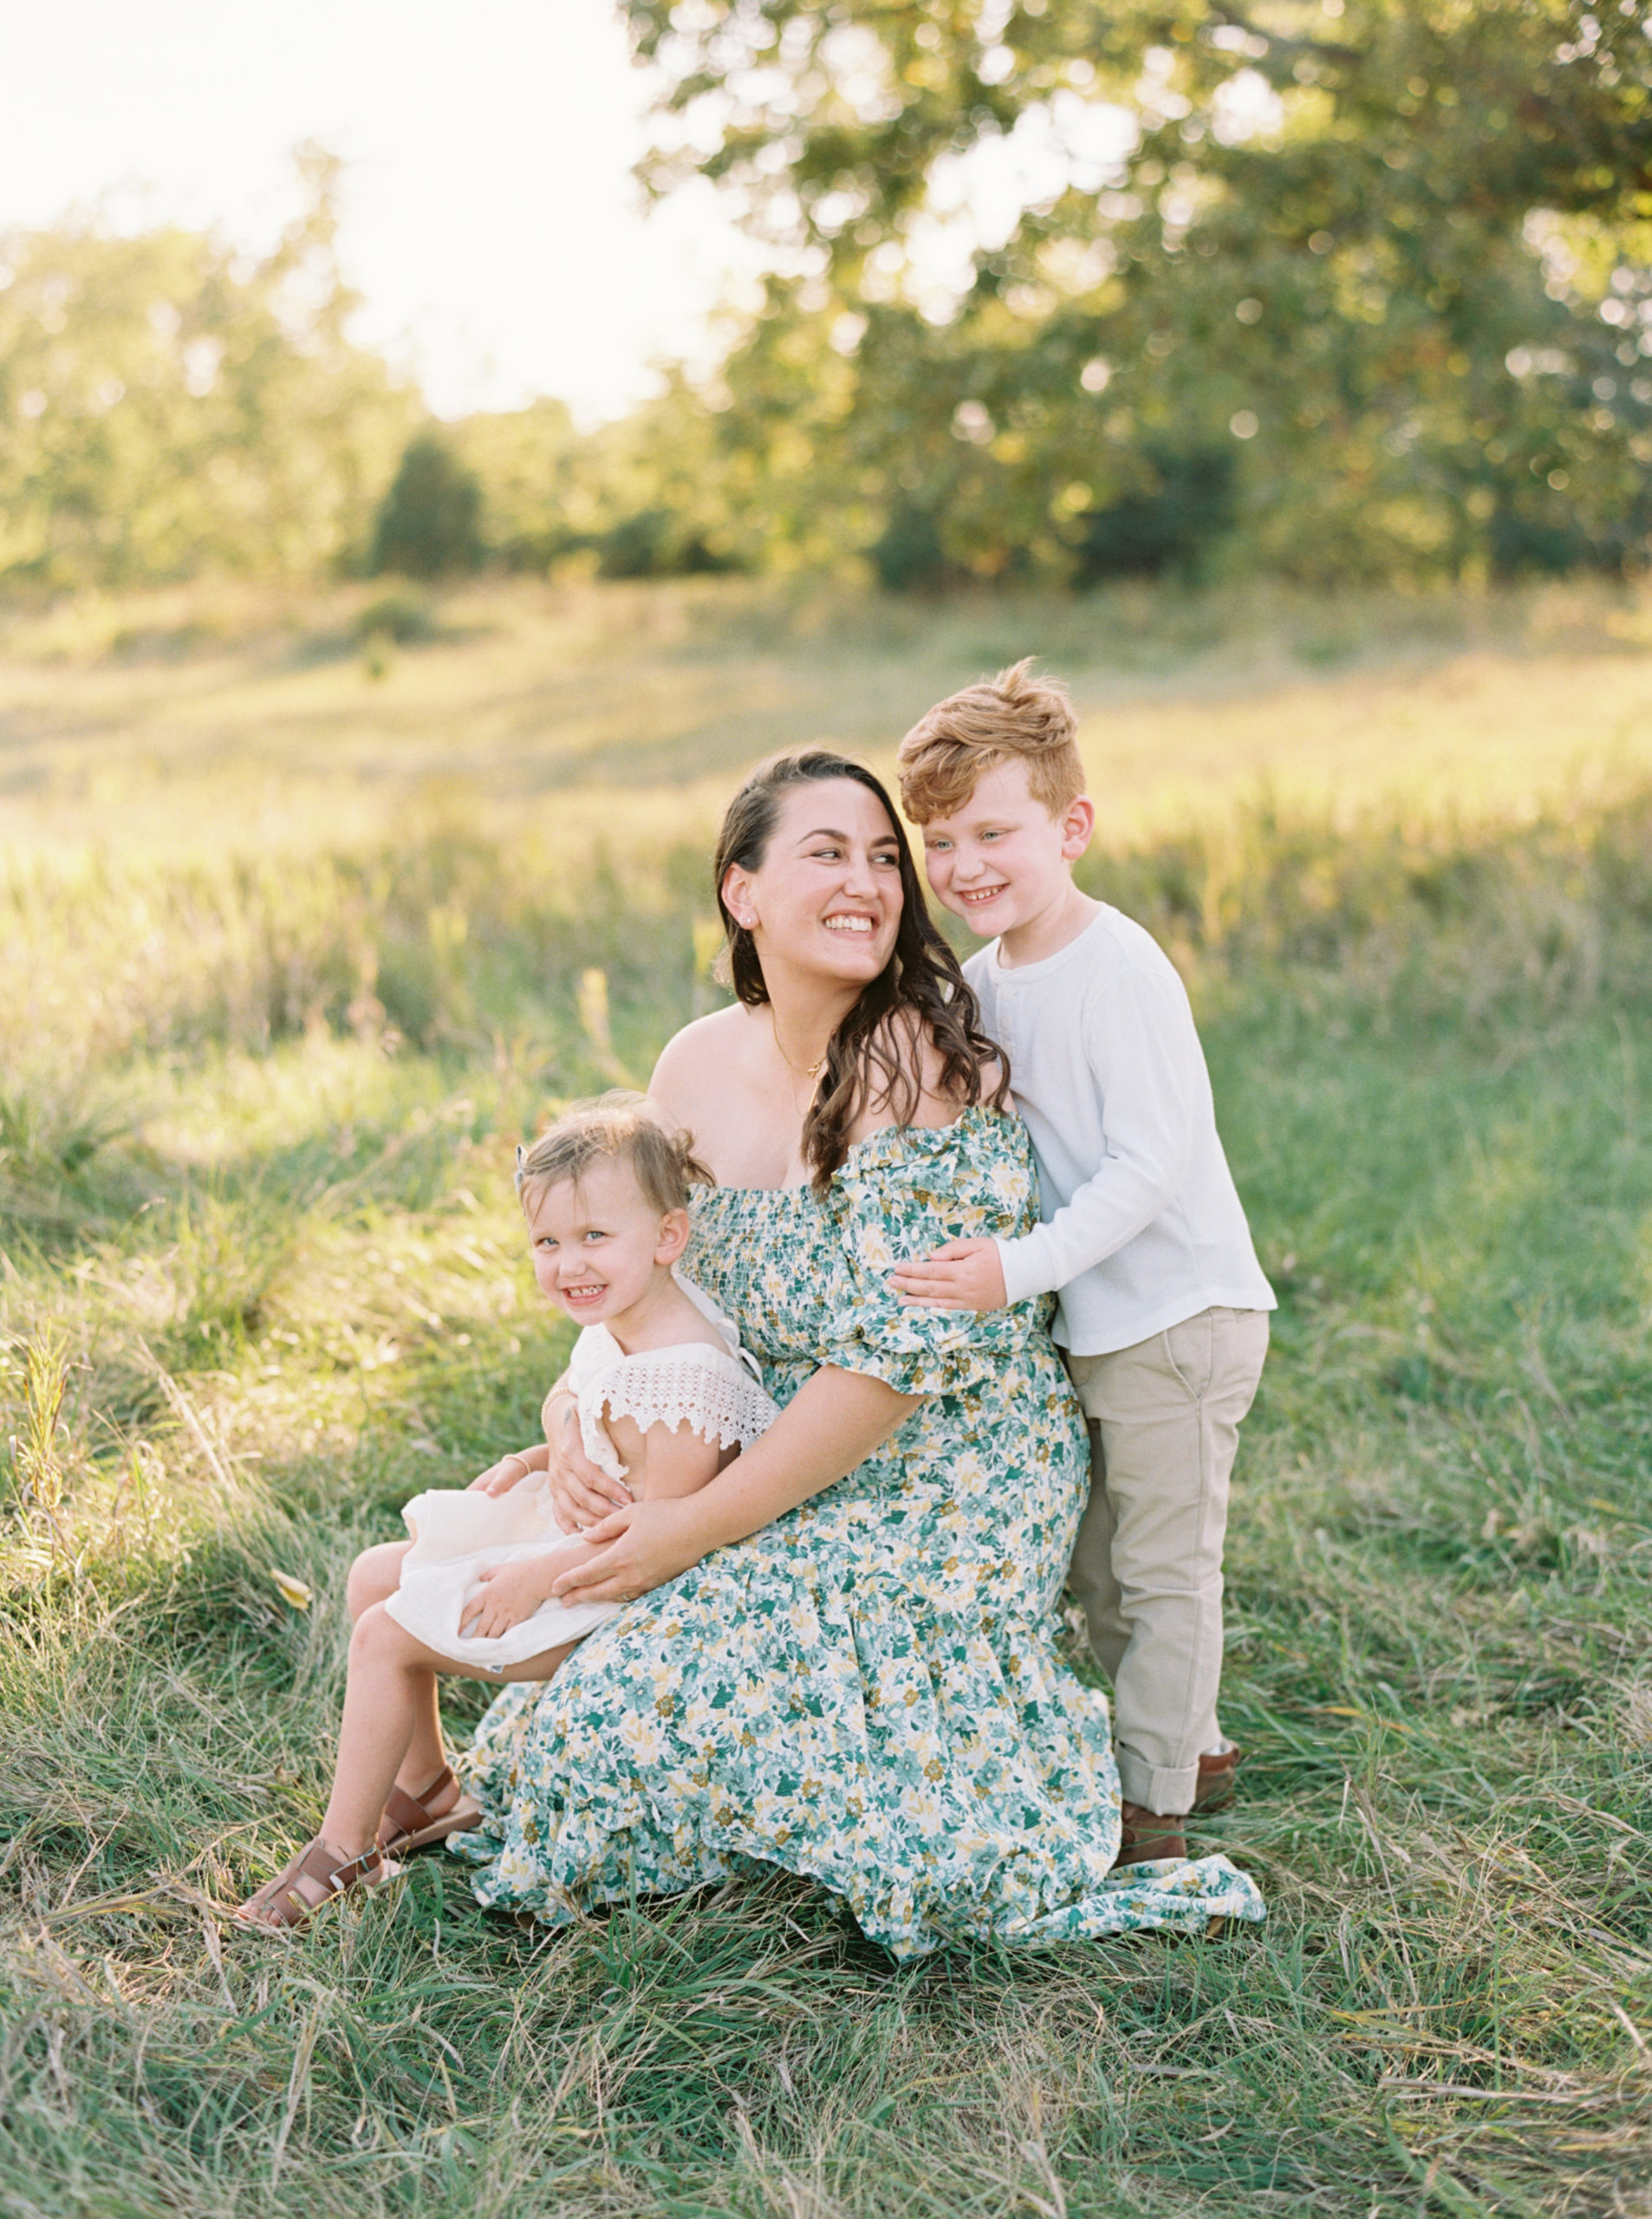 Mother, daughter, and son cuddling in a grassy green field setting in Shorewood in the summer